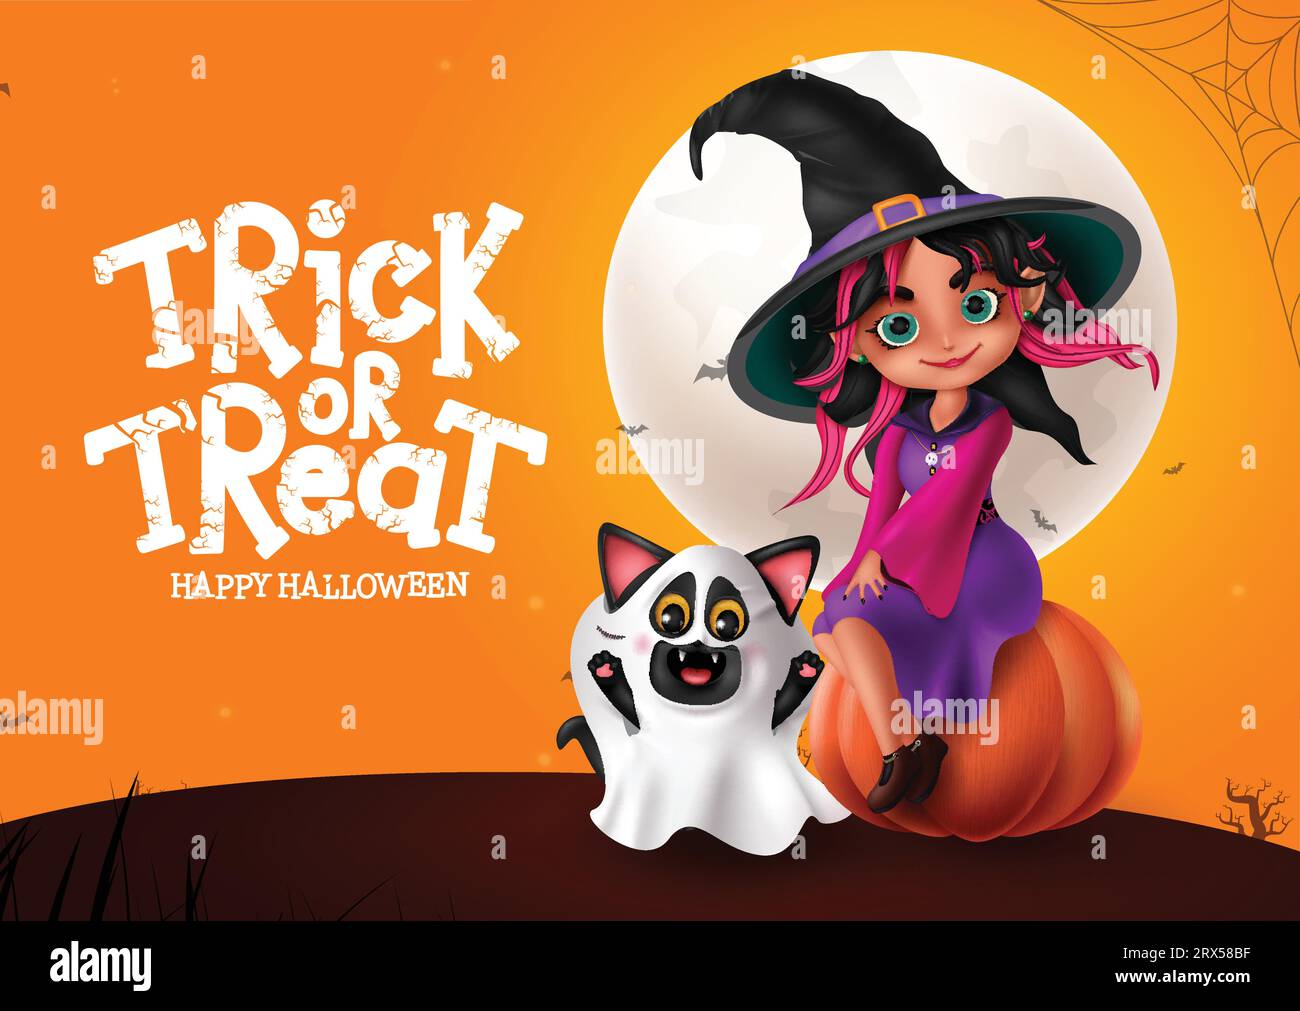 Halloween witch girl character vector design. Happy halloween trick or treat greeting with cute woman witch costume for kids costume party celebration Stock Vector